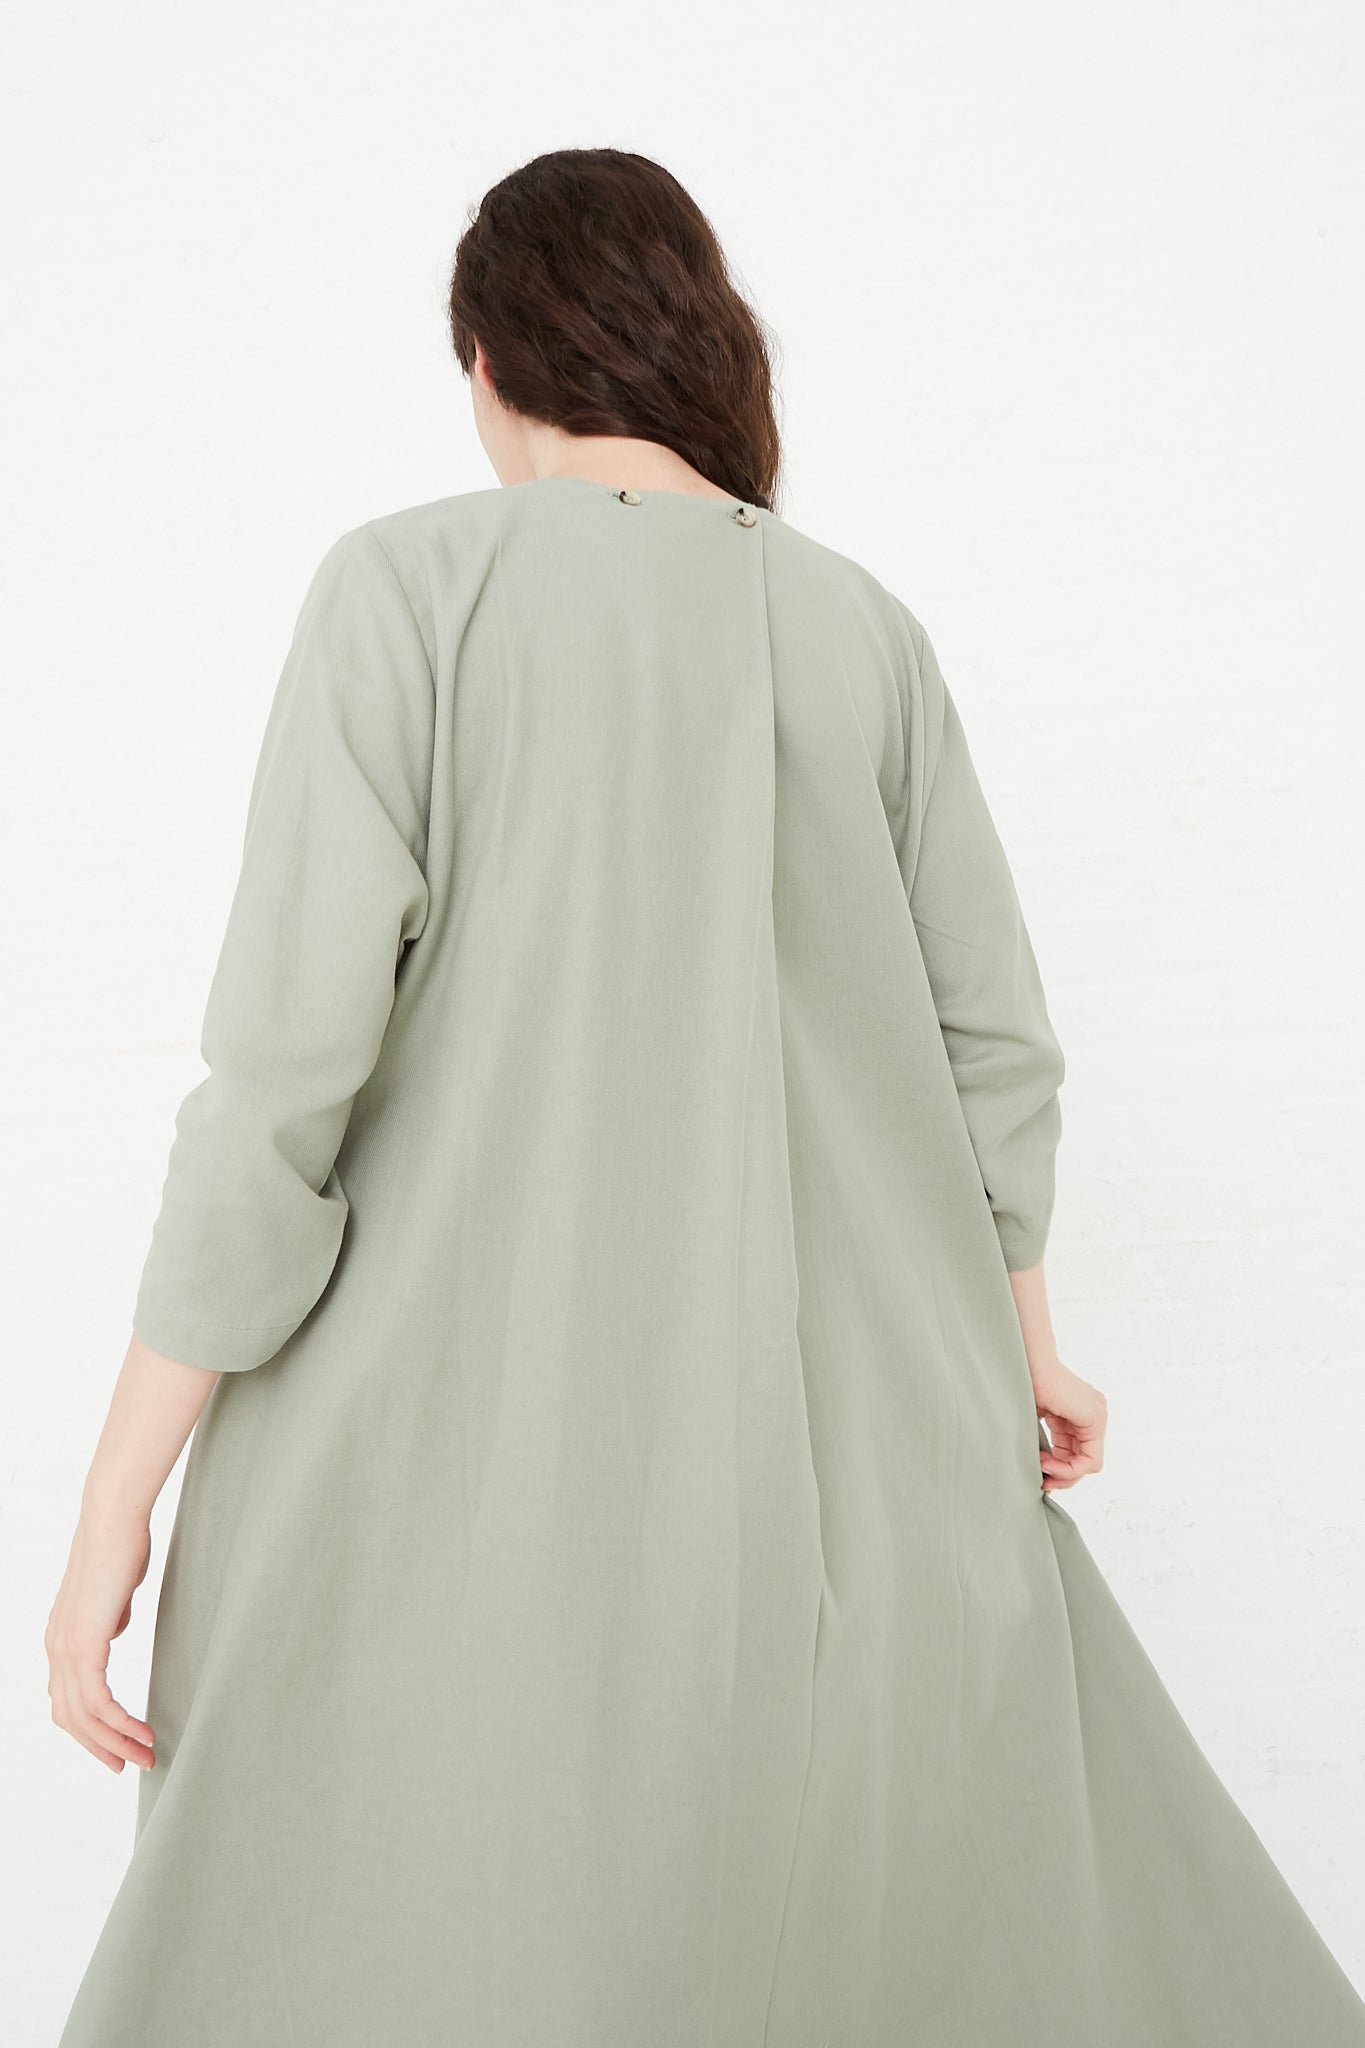 The back view of a woman in a Cotton Twill Shirred Neck Dress in Agave by Black Crane.